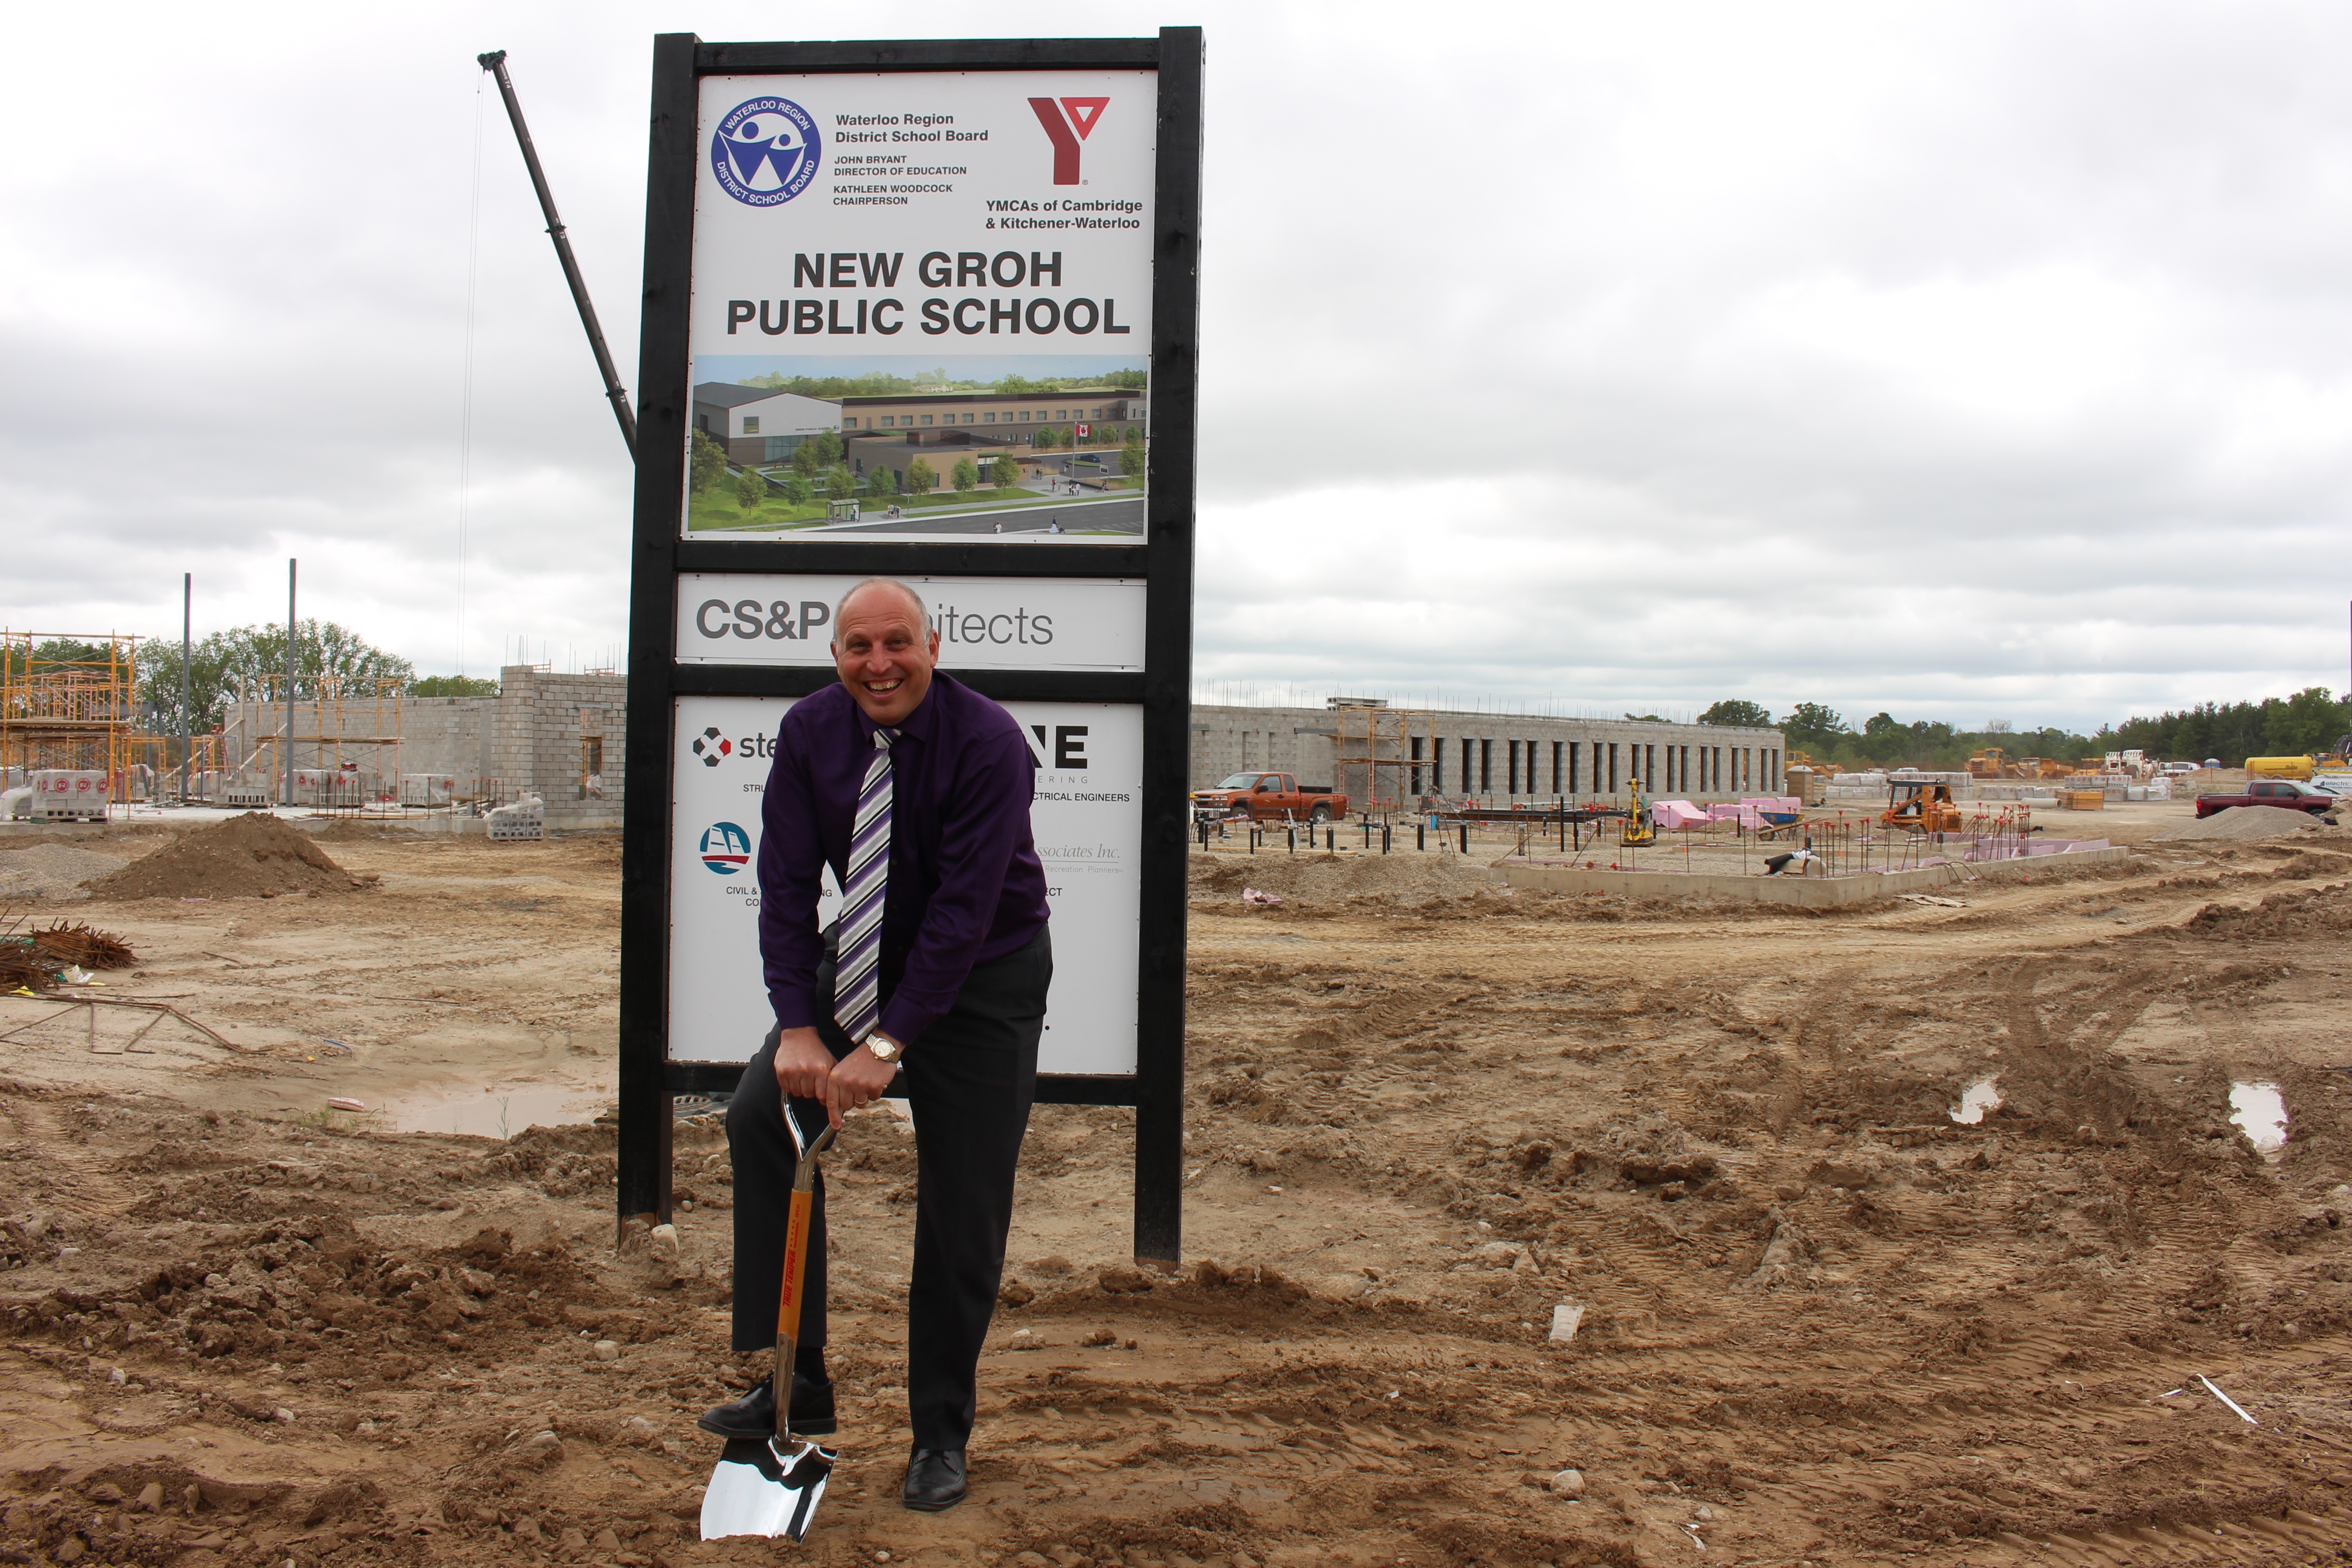 Future Groh PS Principal Helmut Tinnes standing in front of the his new school.